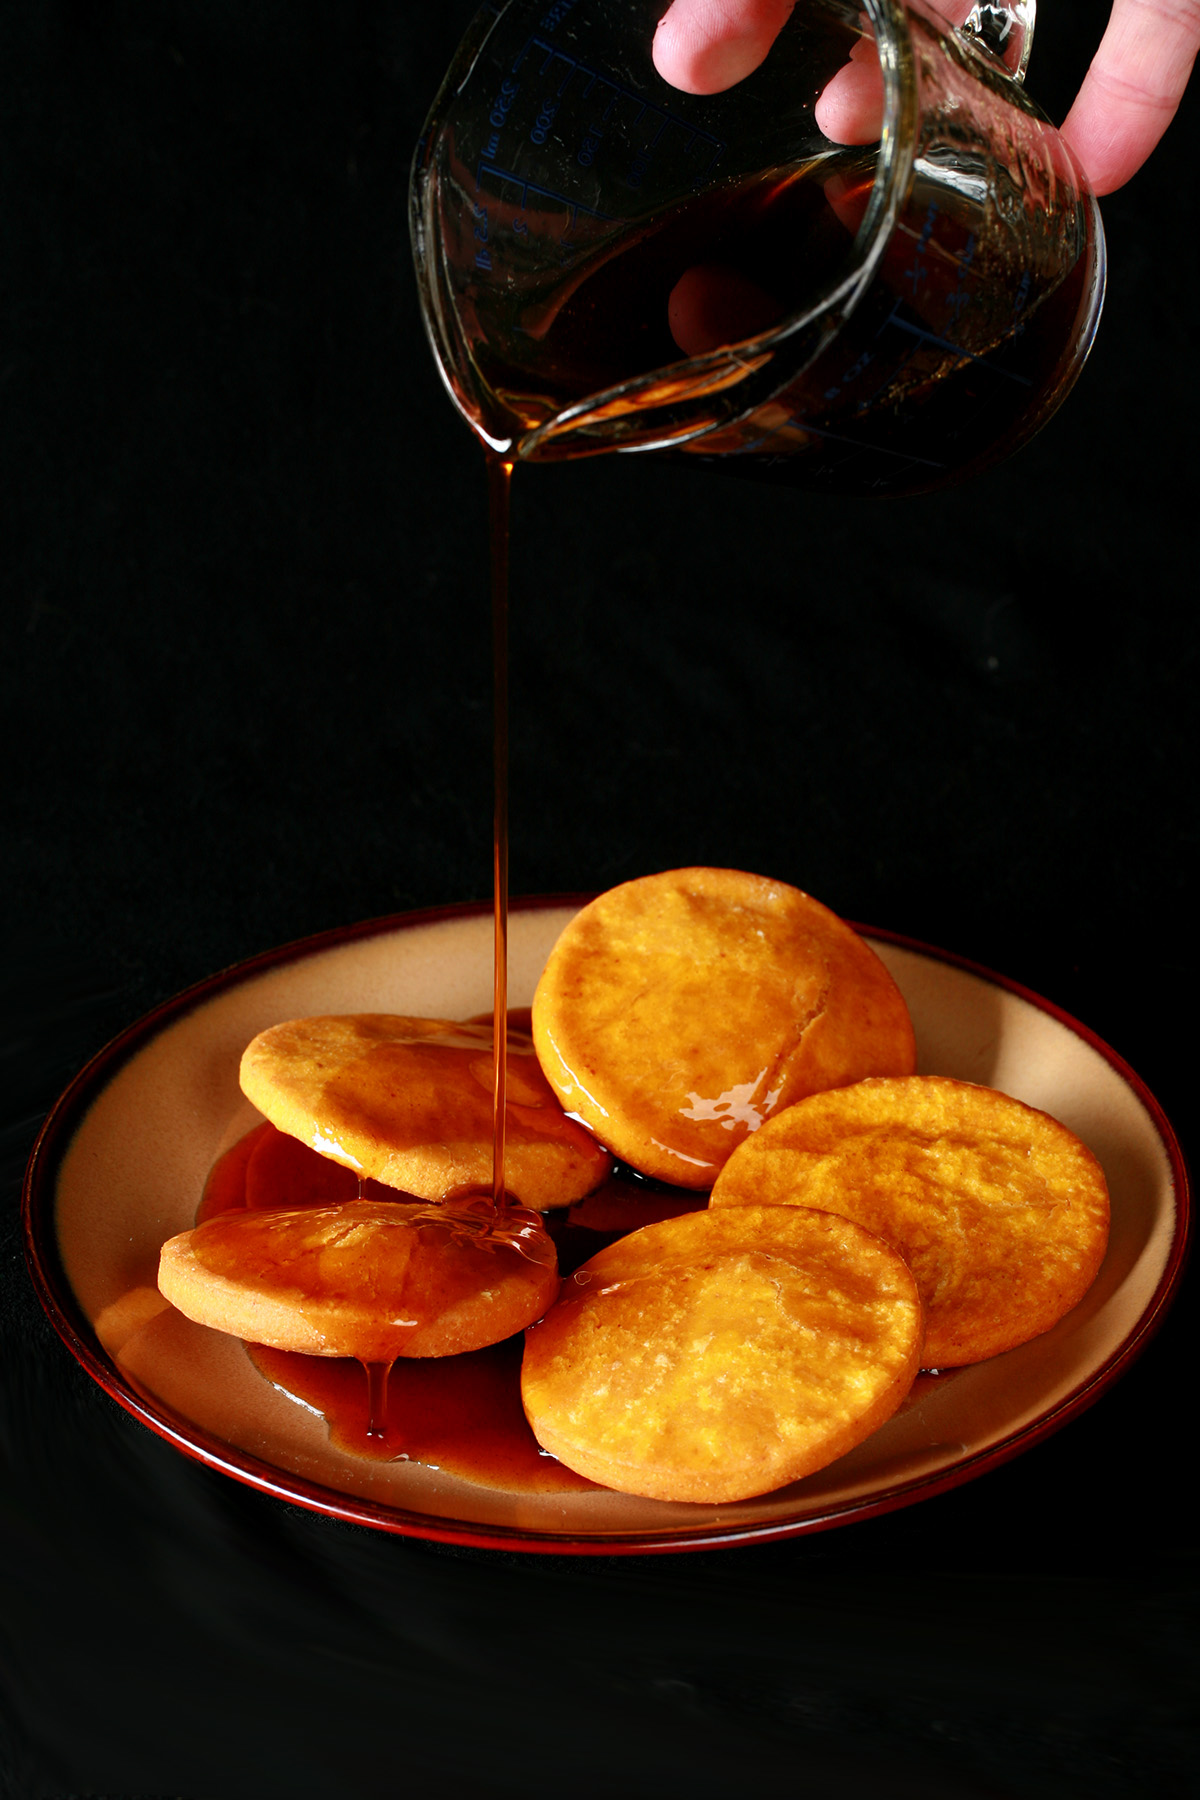 A plate of gluten free sopaipilla pasadas, with sauce drizzled over them.